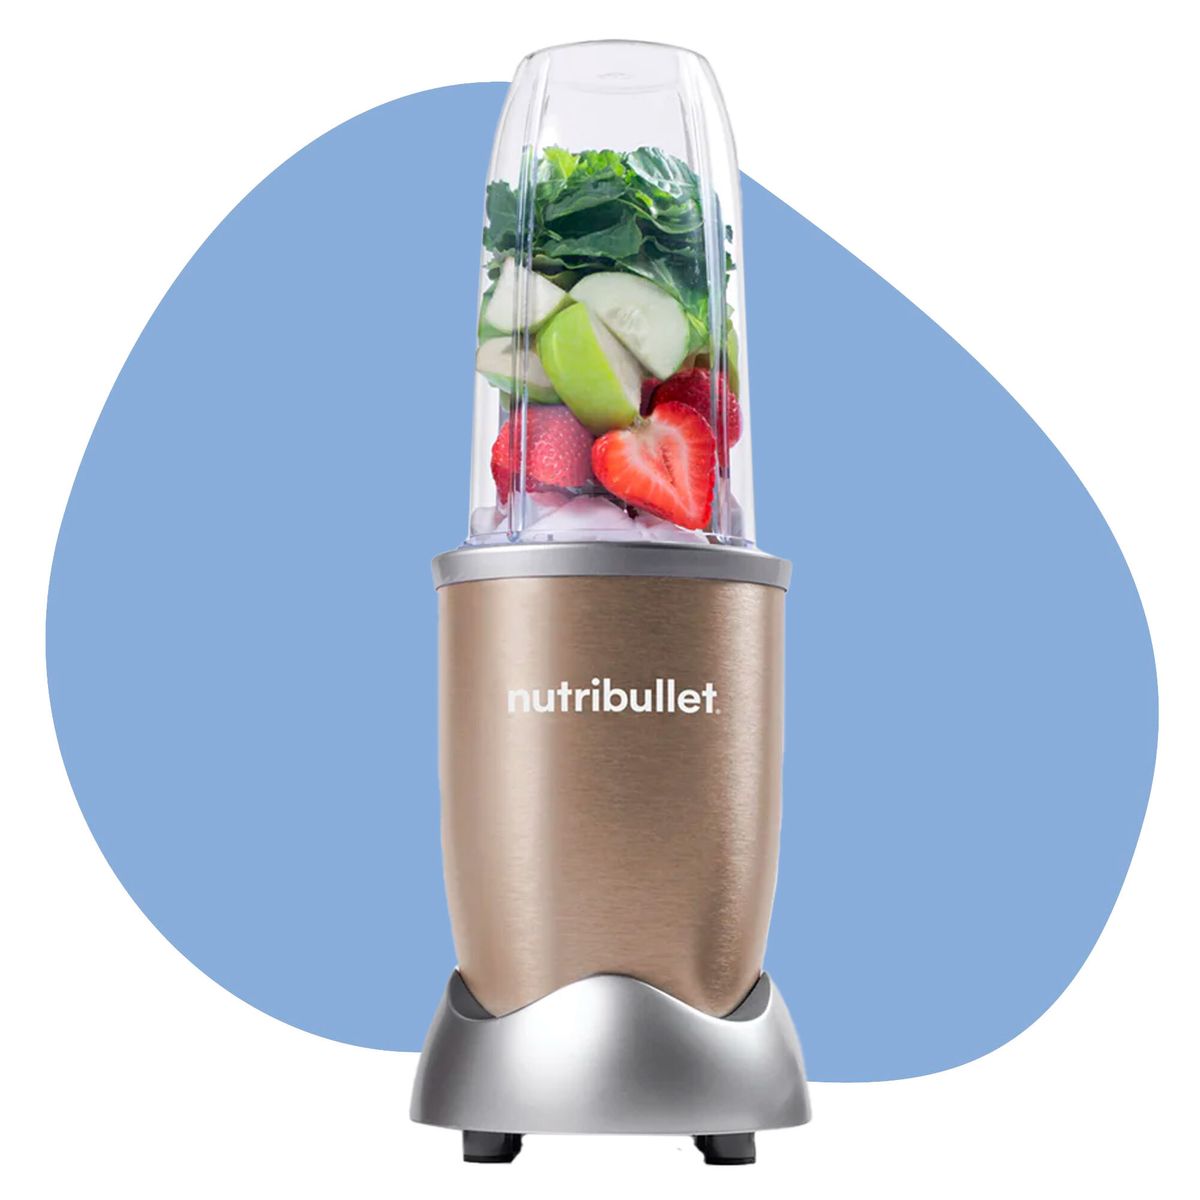 NutriBullet's Rx blends up your smoothie and heats the soup at $80 (Reg.  $150)